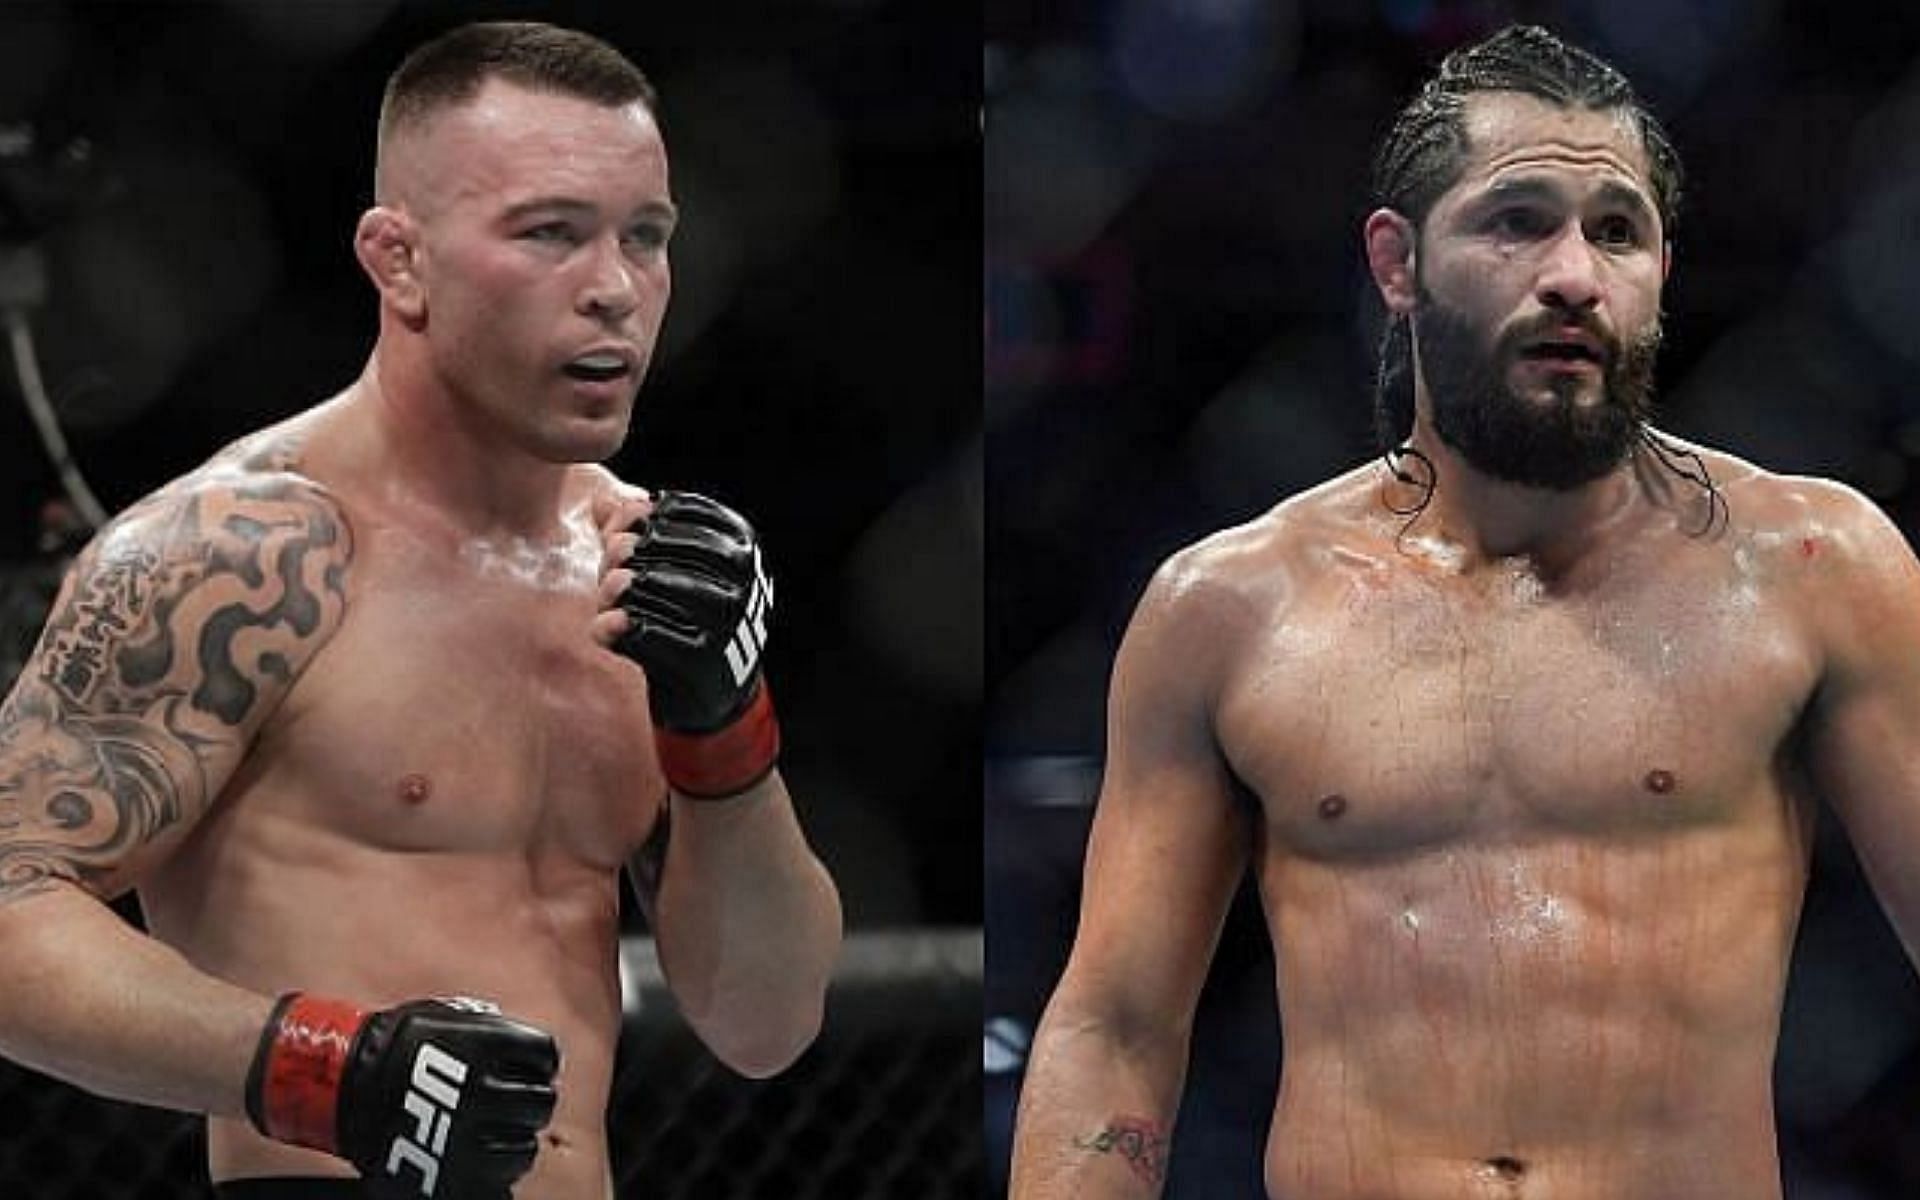 Colby Covington will fight Jorge Masvidal at UFC 272 in March